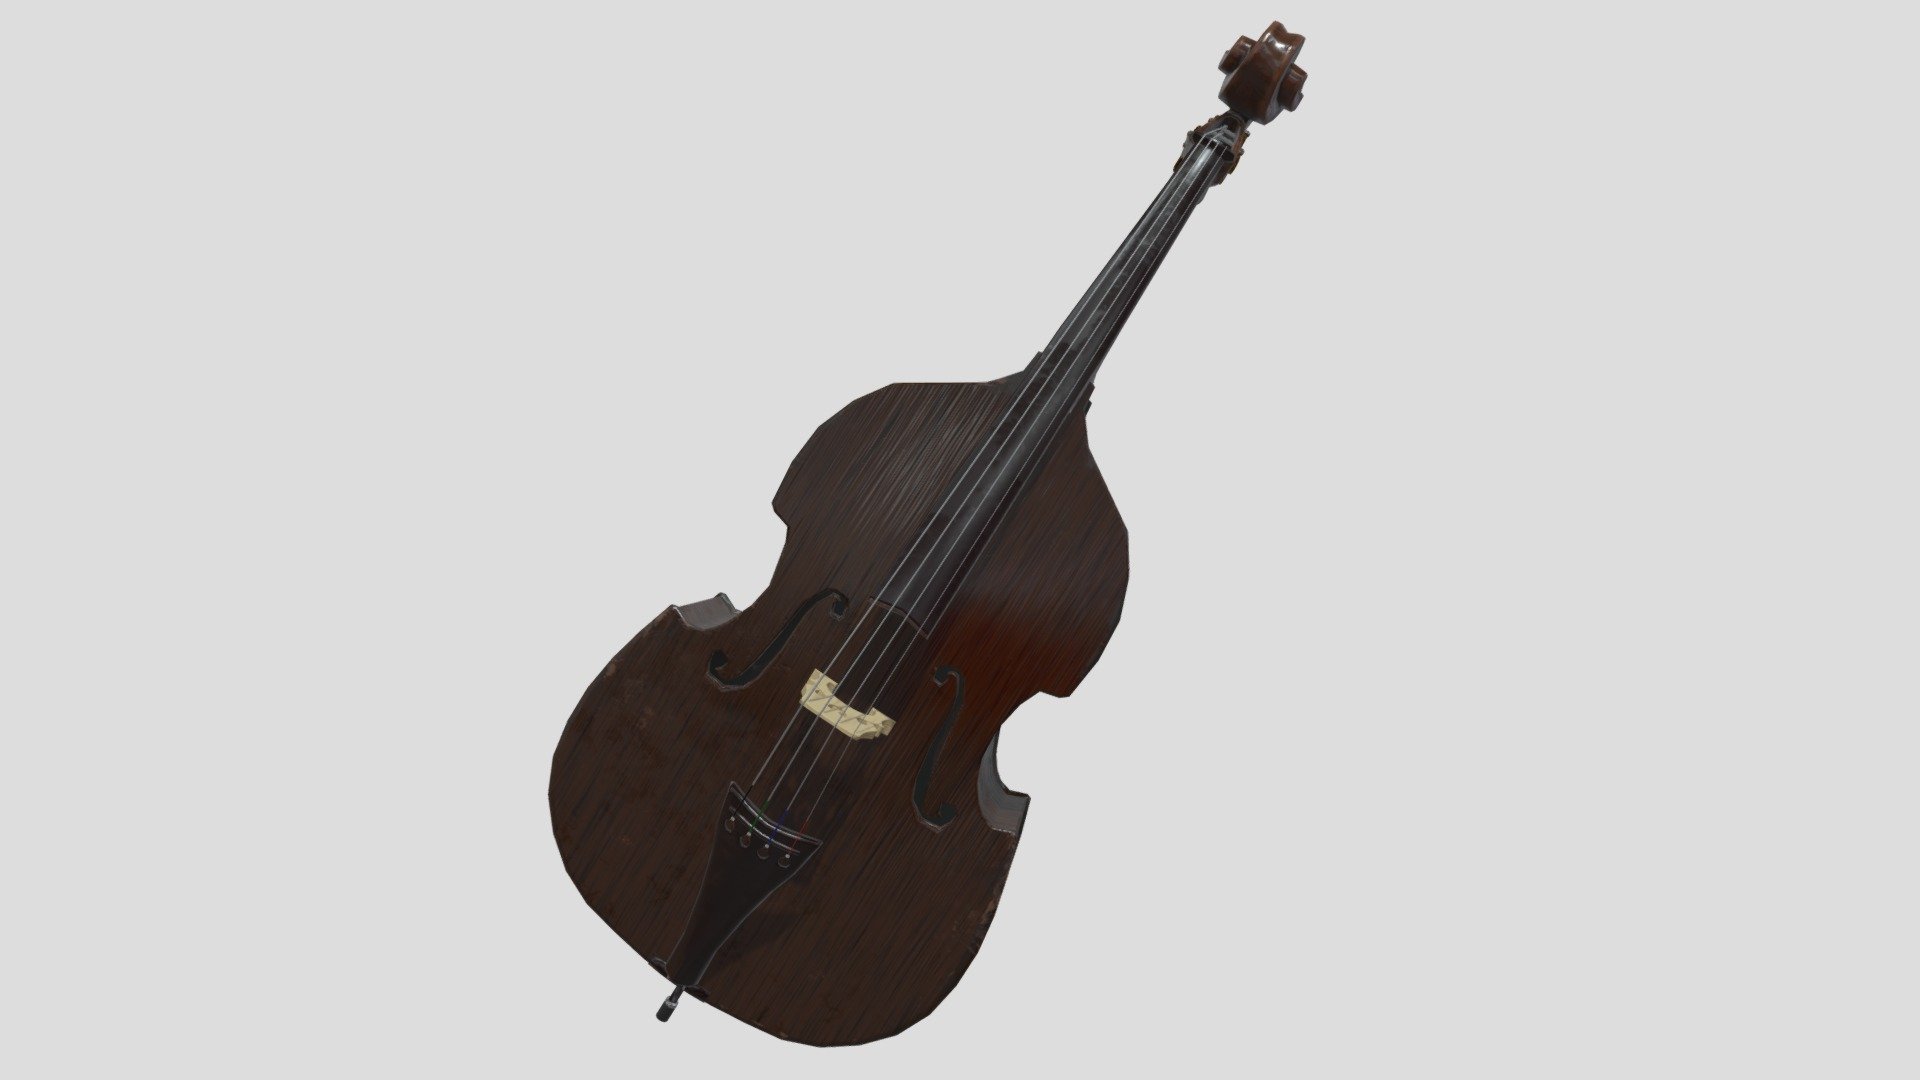 3d model of a Double Bass. Perfect for games, scenes or renders.

Model is correctly divided into main parts. All main parts are presented as separate parts therefore materials of objects are easy to be modified or removed and standard parts are easy to be replaced.

TEXTURES: Models includes high textures with maps: Base Color (.png) Height (.png) Metallic (.png) Normal (.png) Roughness (.png)

FORMATS: .obj .dae .stl .blend .fbx .3ds

GENERAL: Easy editable. Model is fully textured.

Vertices: 13.5 k Polygons: 13.1 k

All formats have been tested and work correctly.

Some files may need textures or materials adjusted or added depending on the program they are imported into 3d model